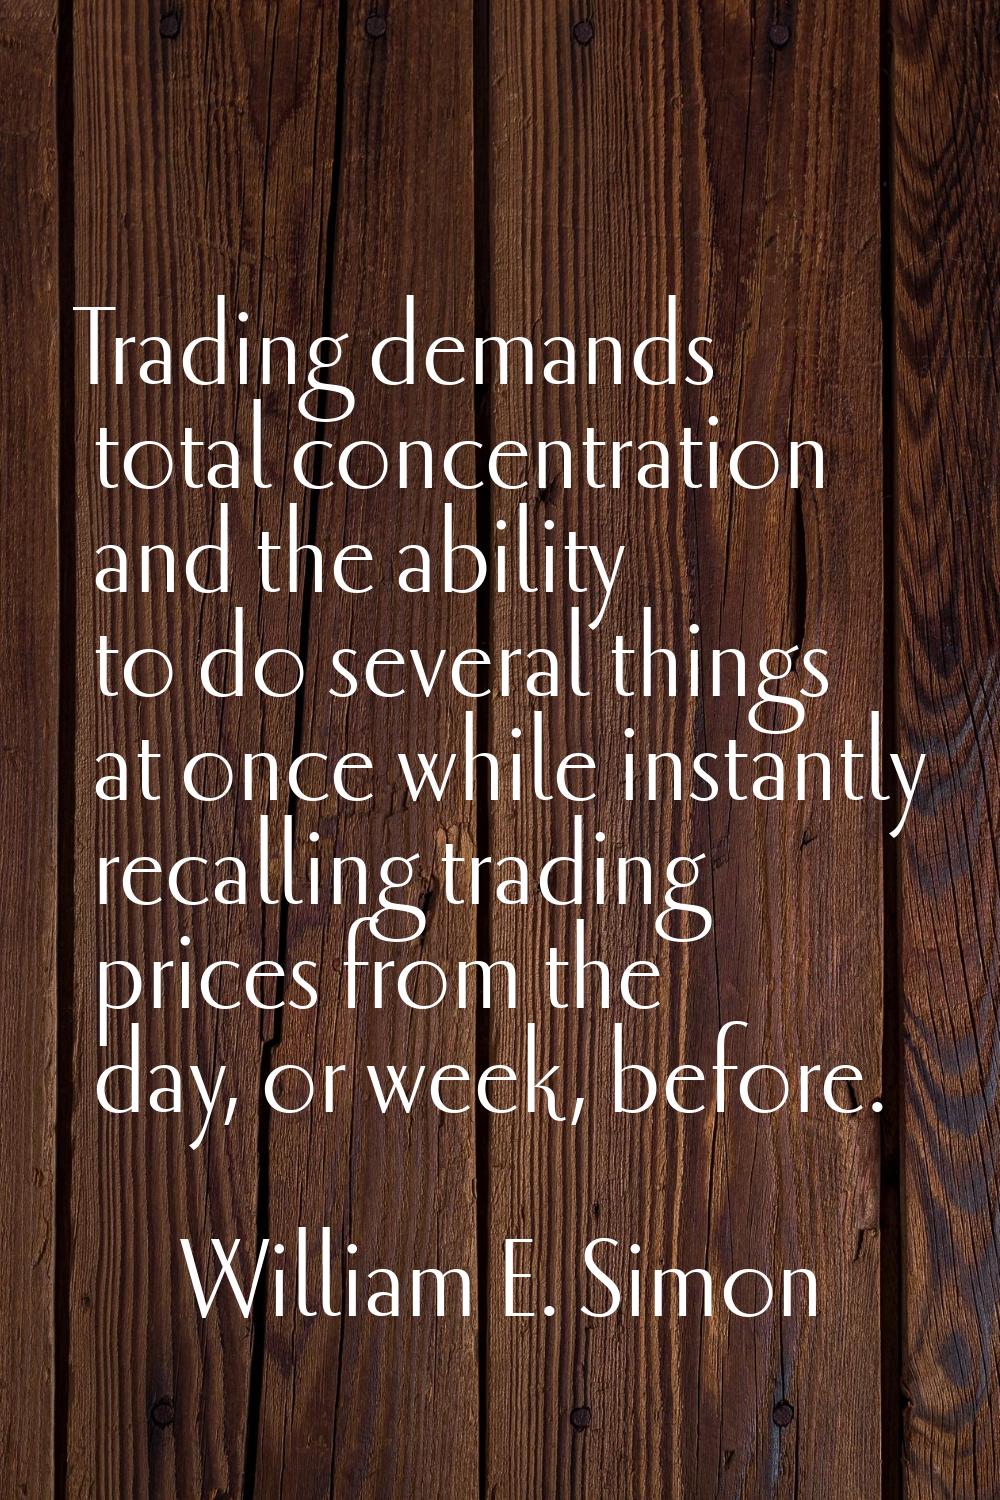 Trading demands total concentration and the ability to do several things at once while instantly re